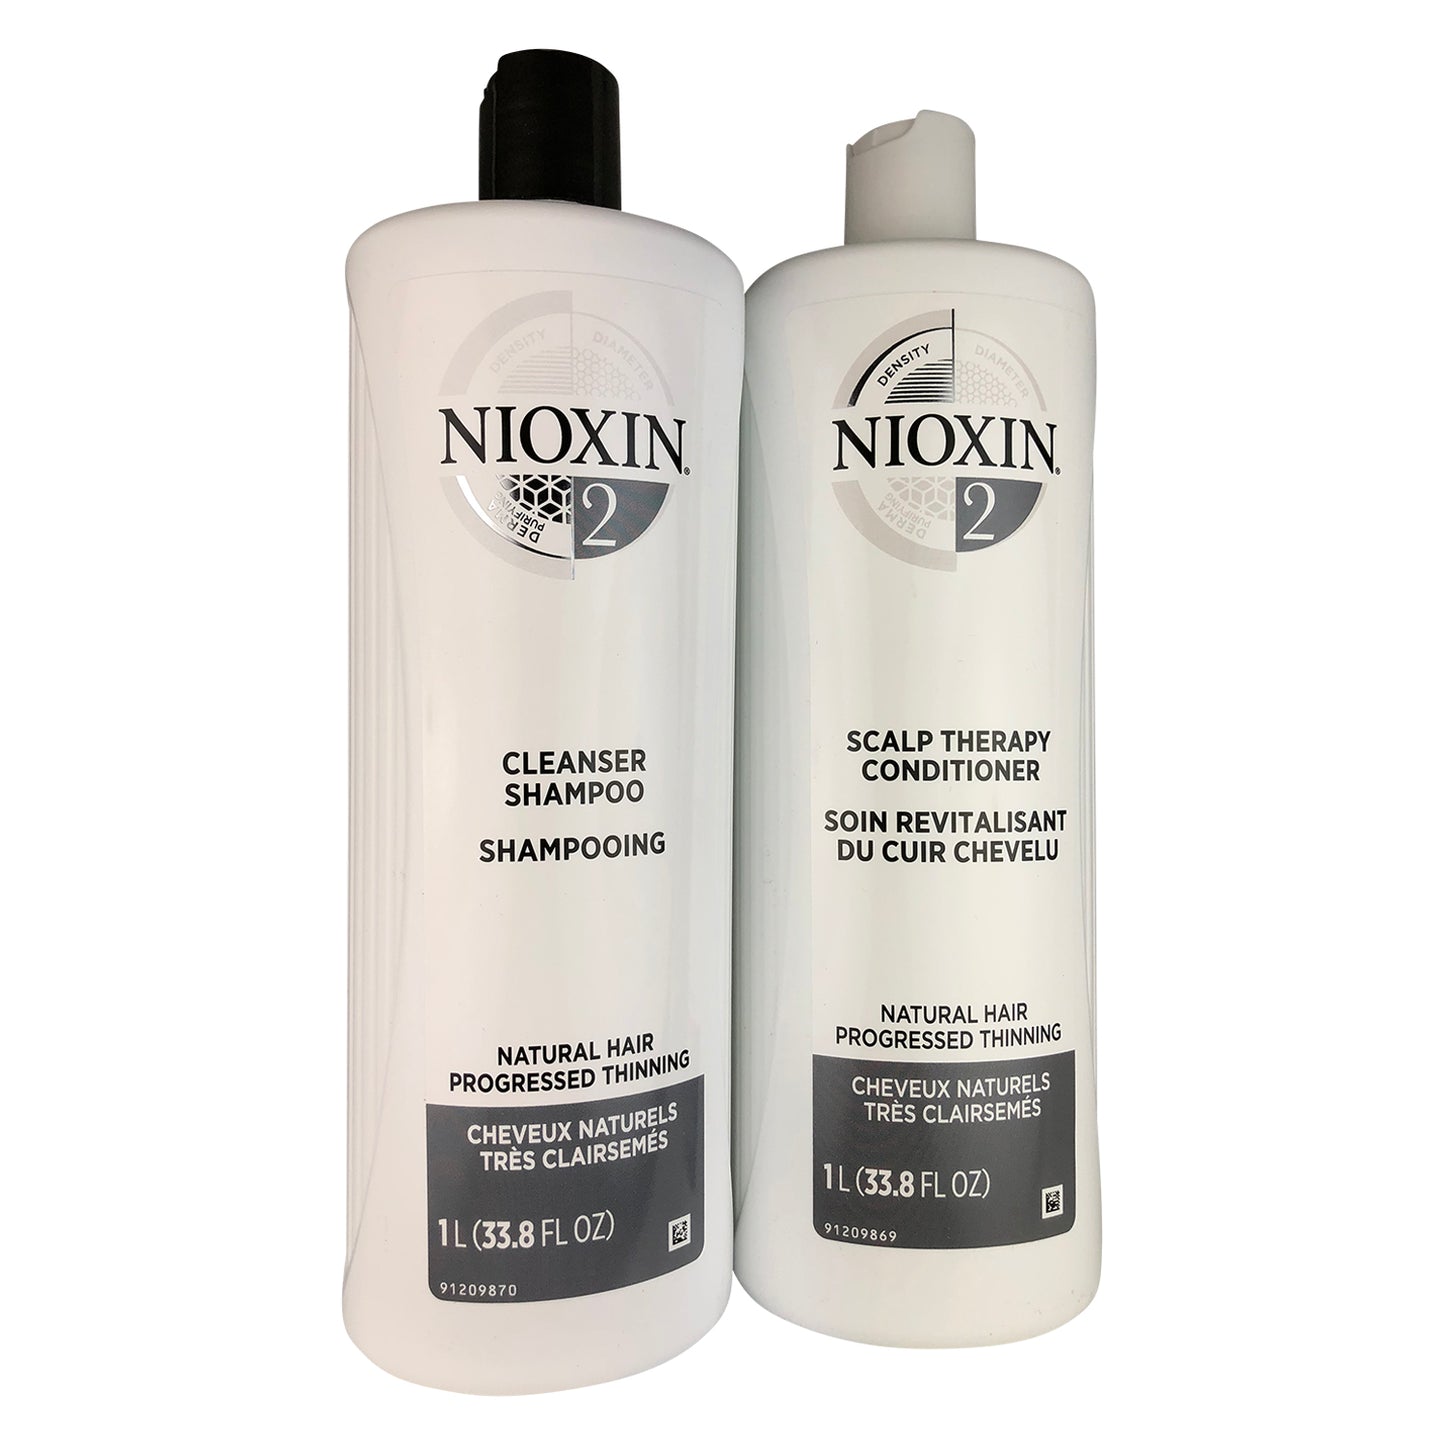 Nioxin System 2 Duo (Cleanser Shampoo and Scalp Therapy Conditioner)